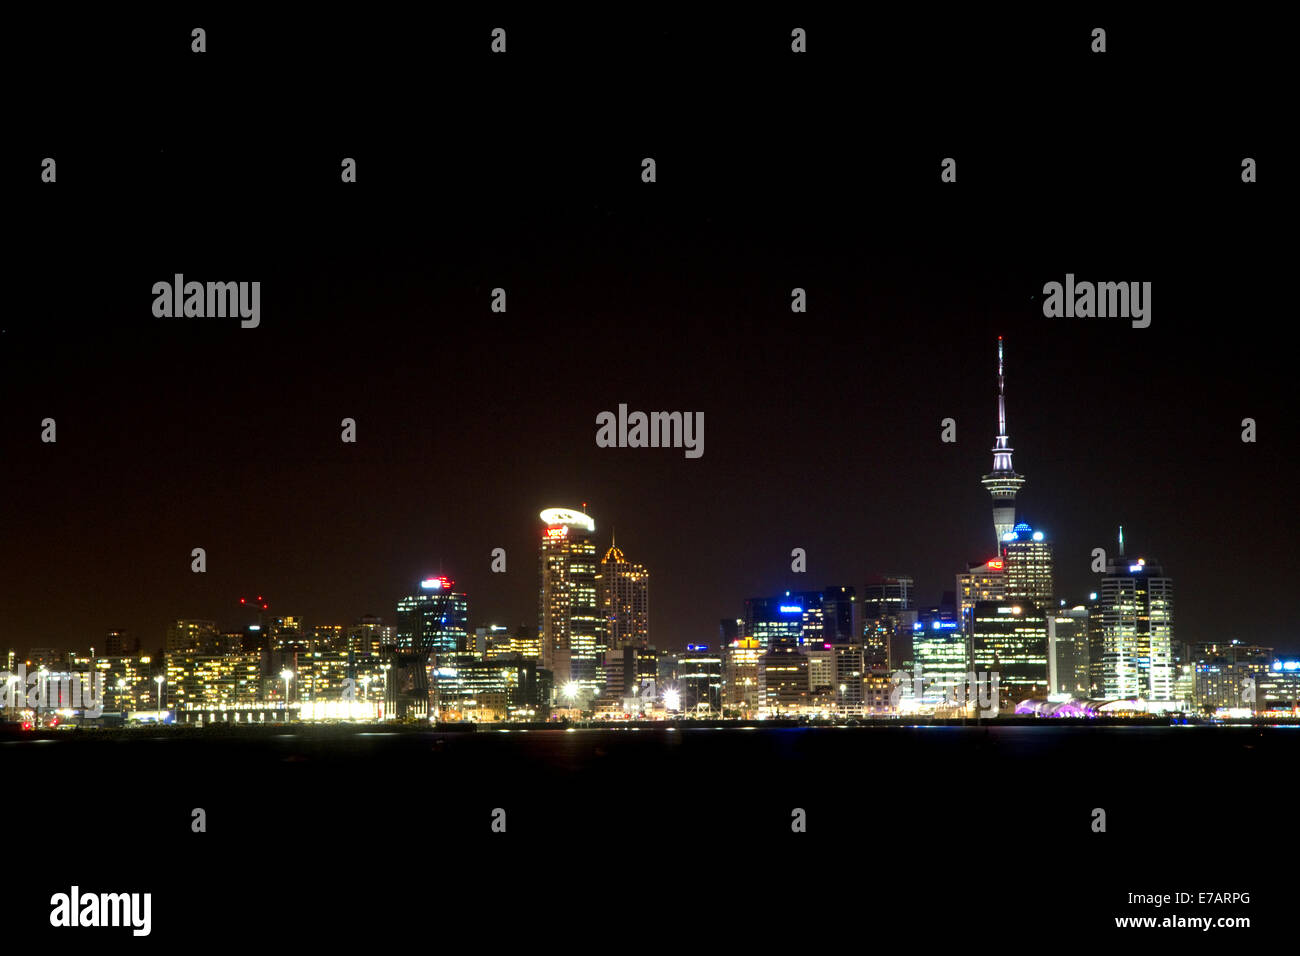 The night cityscape of Auckland, North Island, New Zealand. Stock Photo